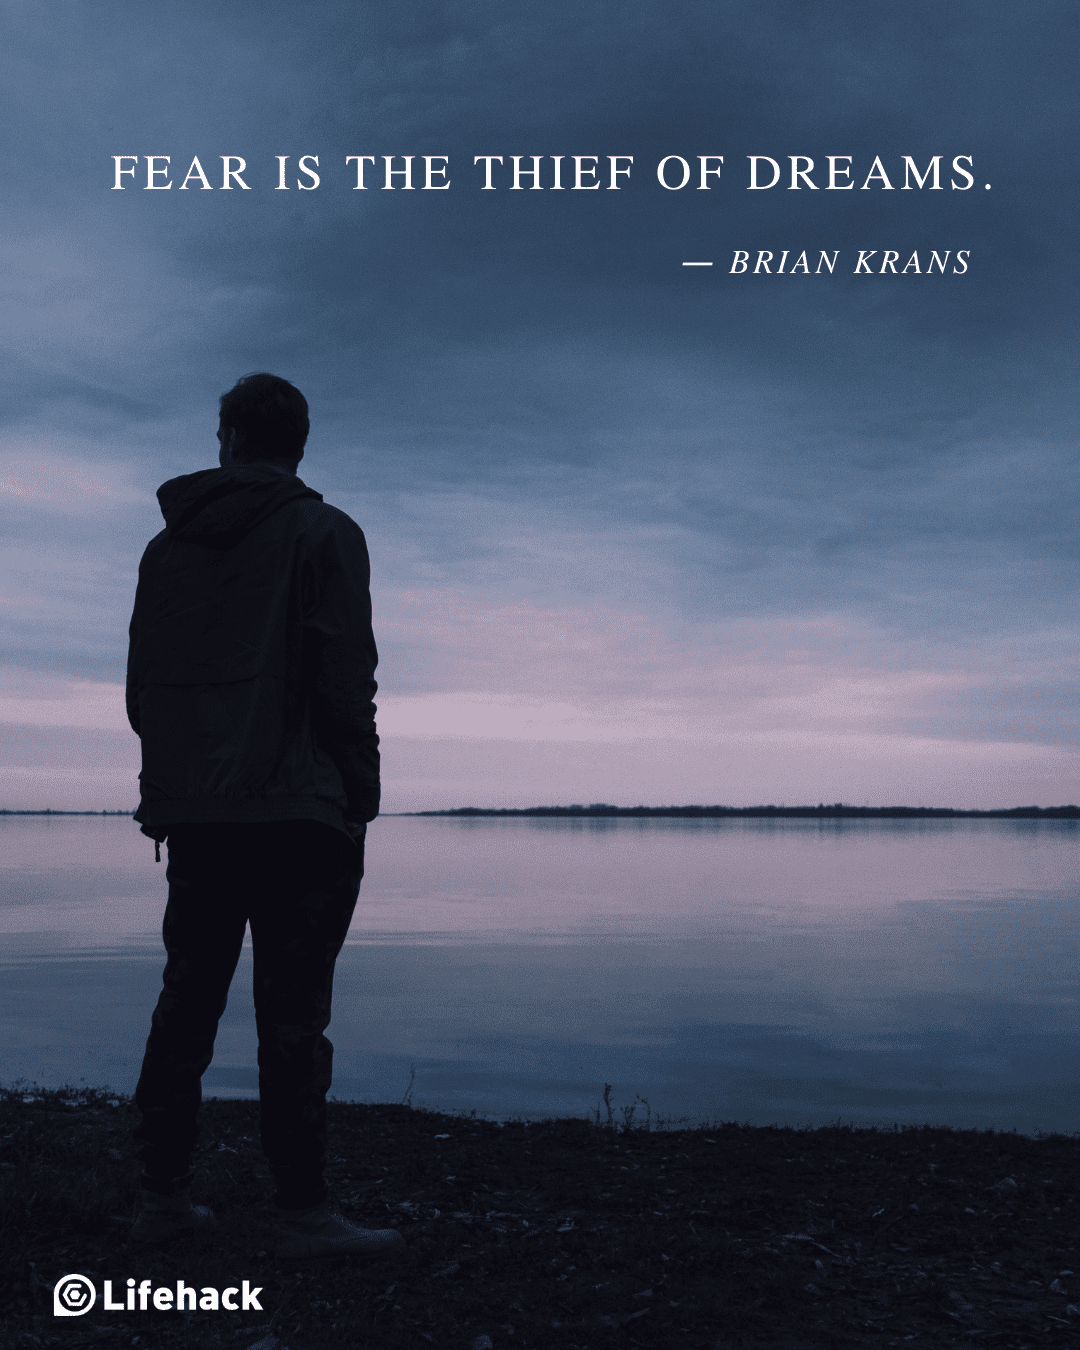 22 Inspiring Quotes About Fear to Help You Face Your Fear